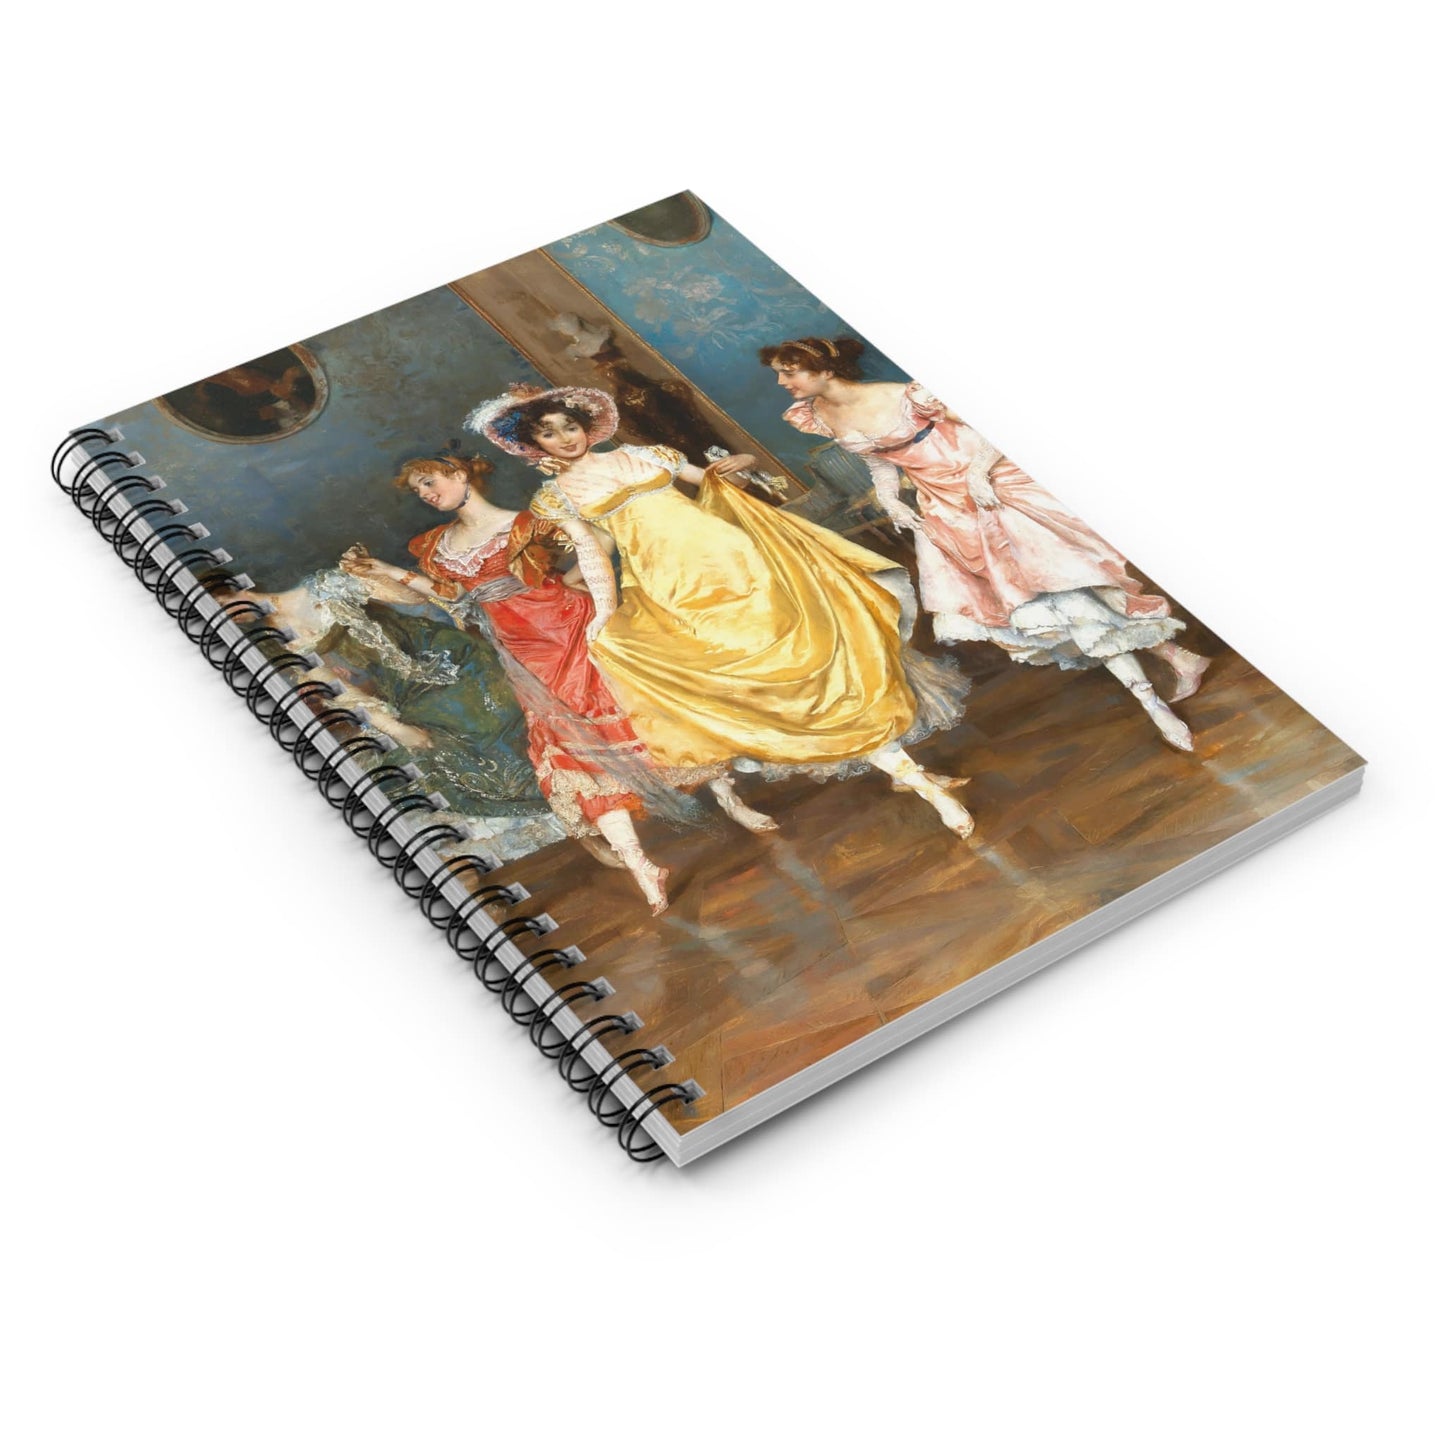 Victorian Girls Dancing Spiral Notebook Laying Flat on White Surface